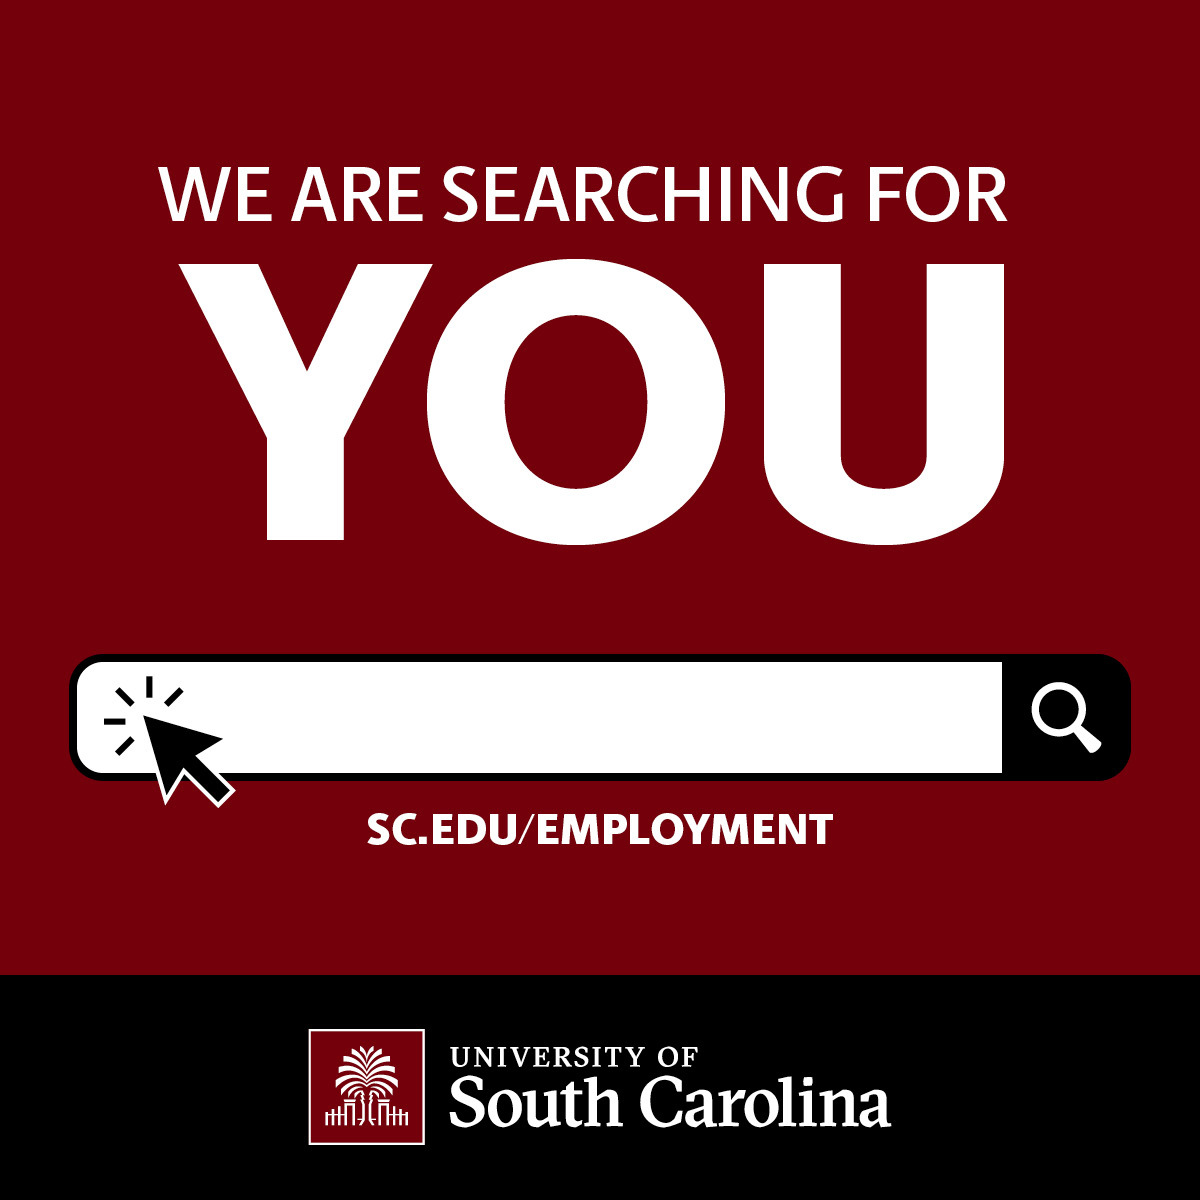 We Are Searching for You graphic